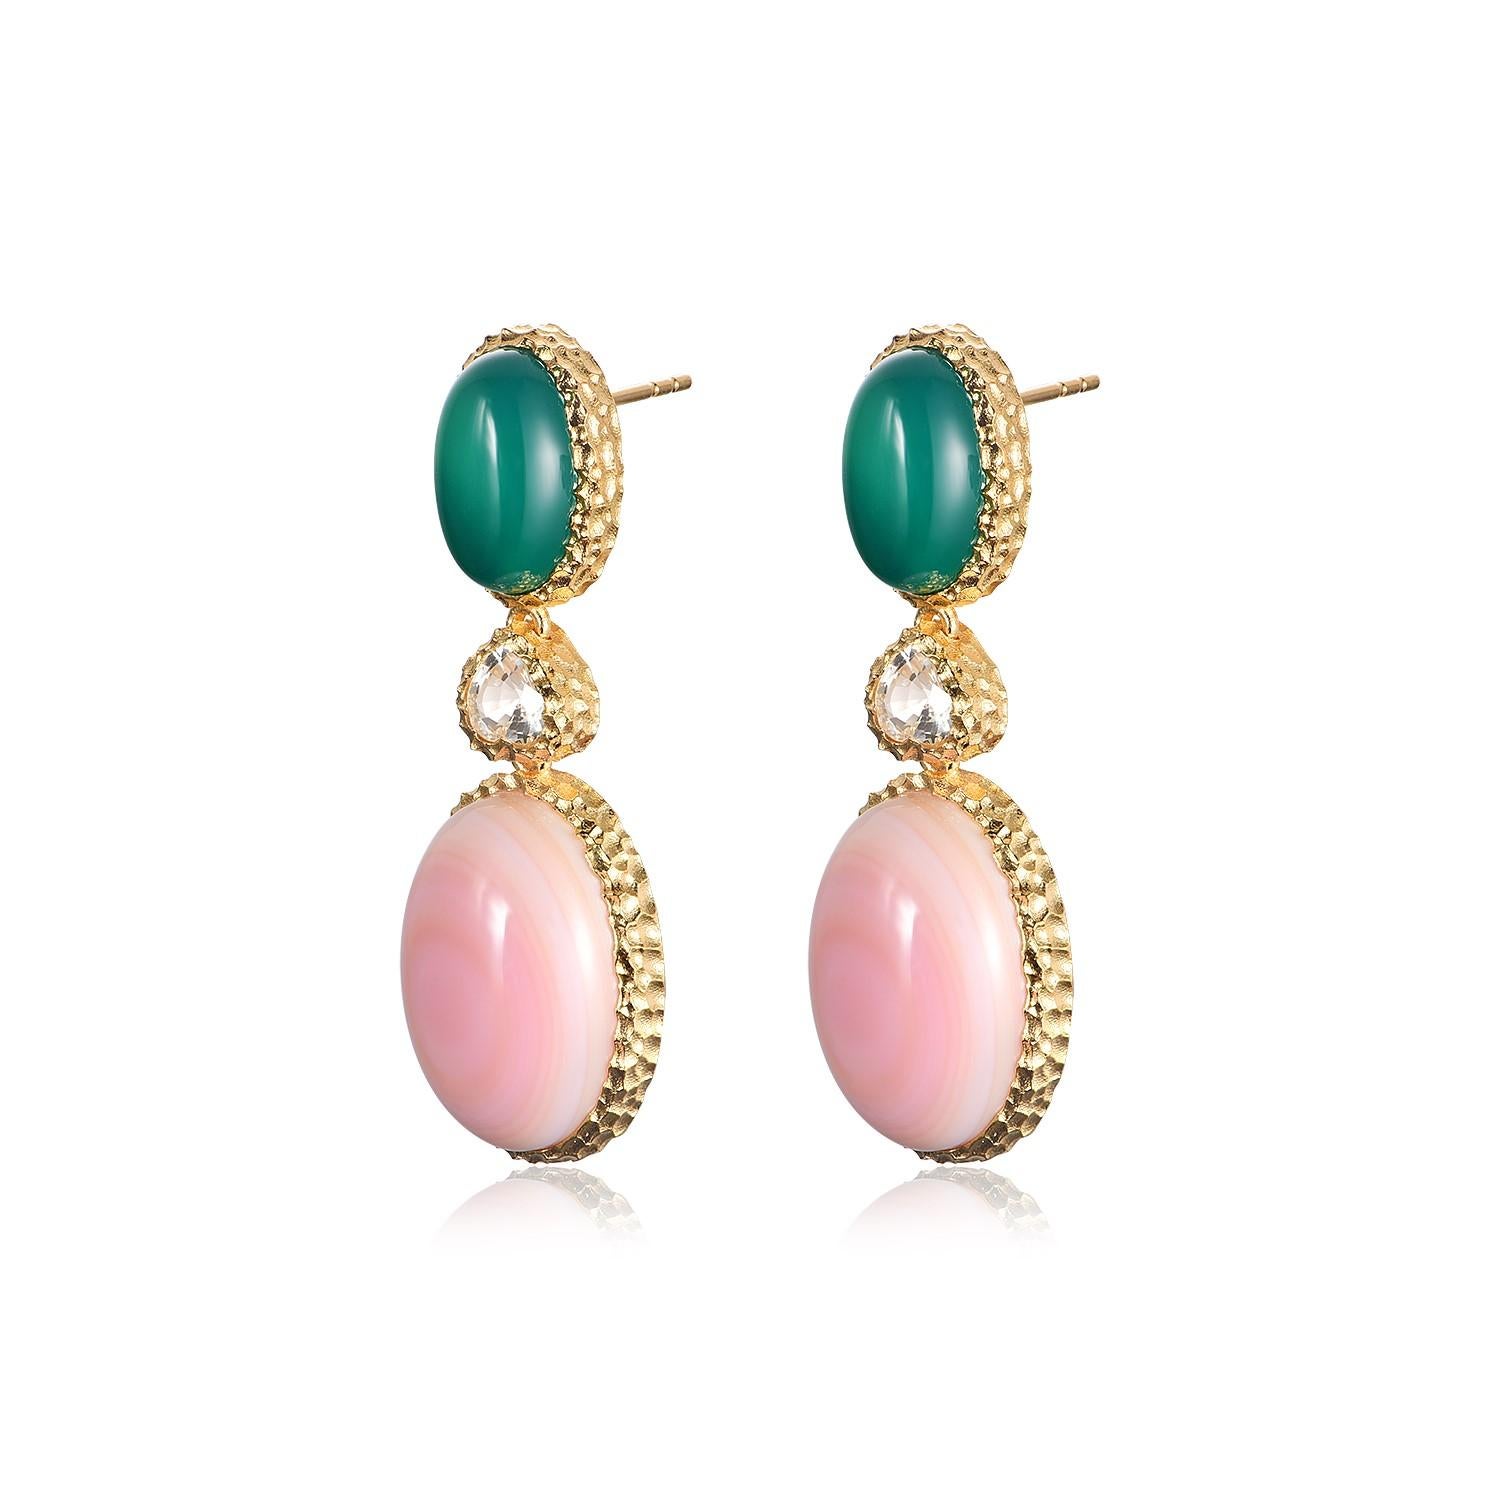 These exquisite drop earrings are a testament to classic elegance with a touch of modern sophistication. Crafted in the lustrous warmth of 18K gold vermeil over sterling silver, each earring features a luscious green agate oval at the post, boasting